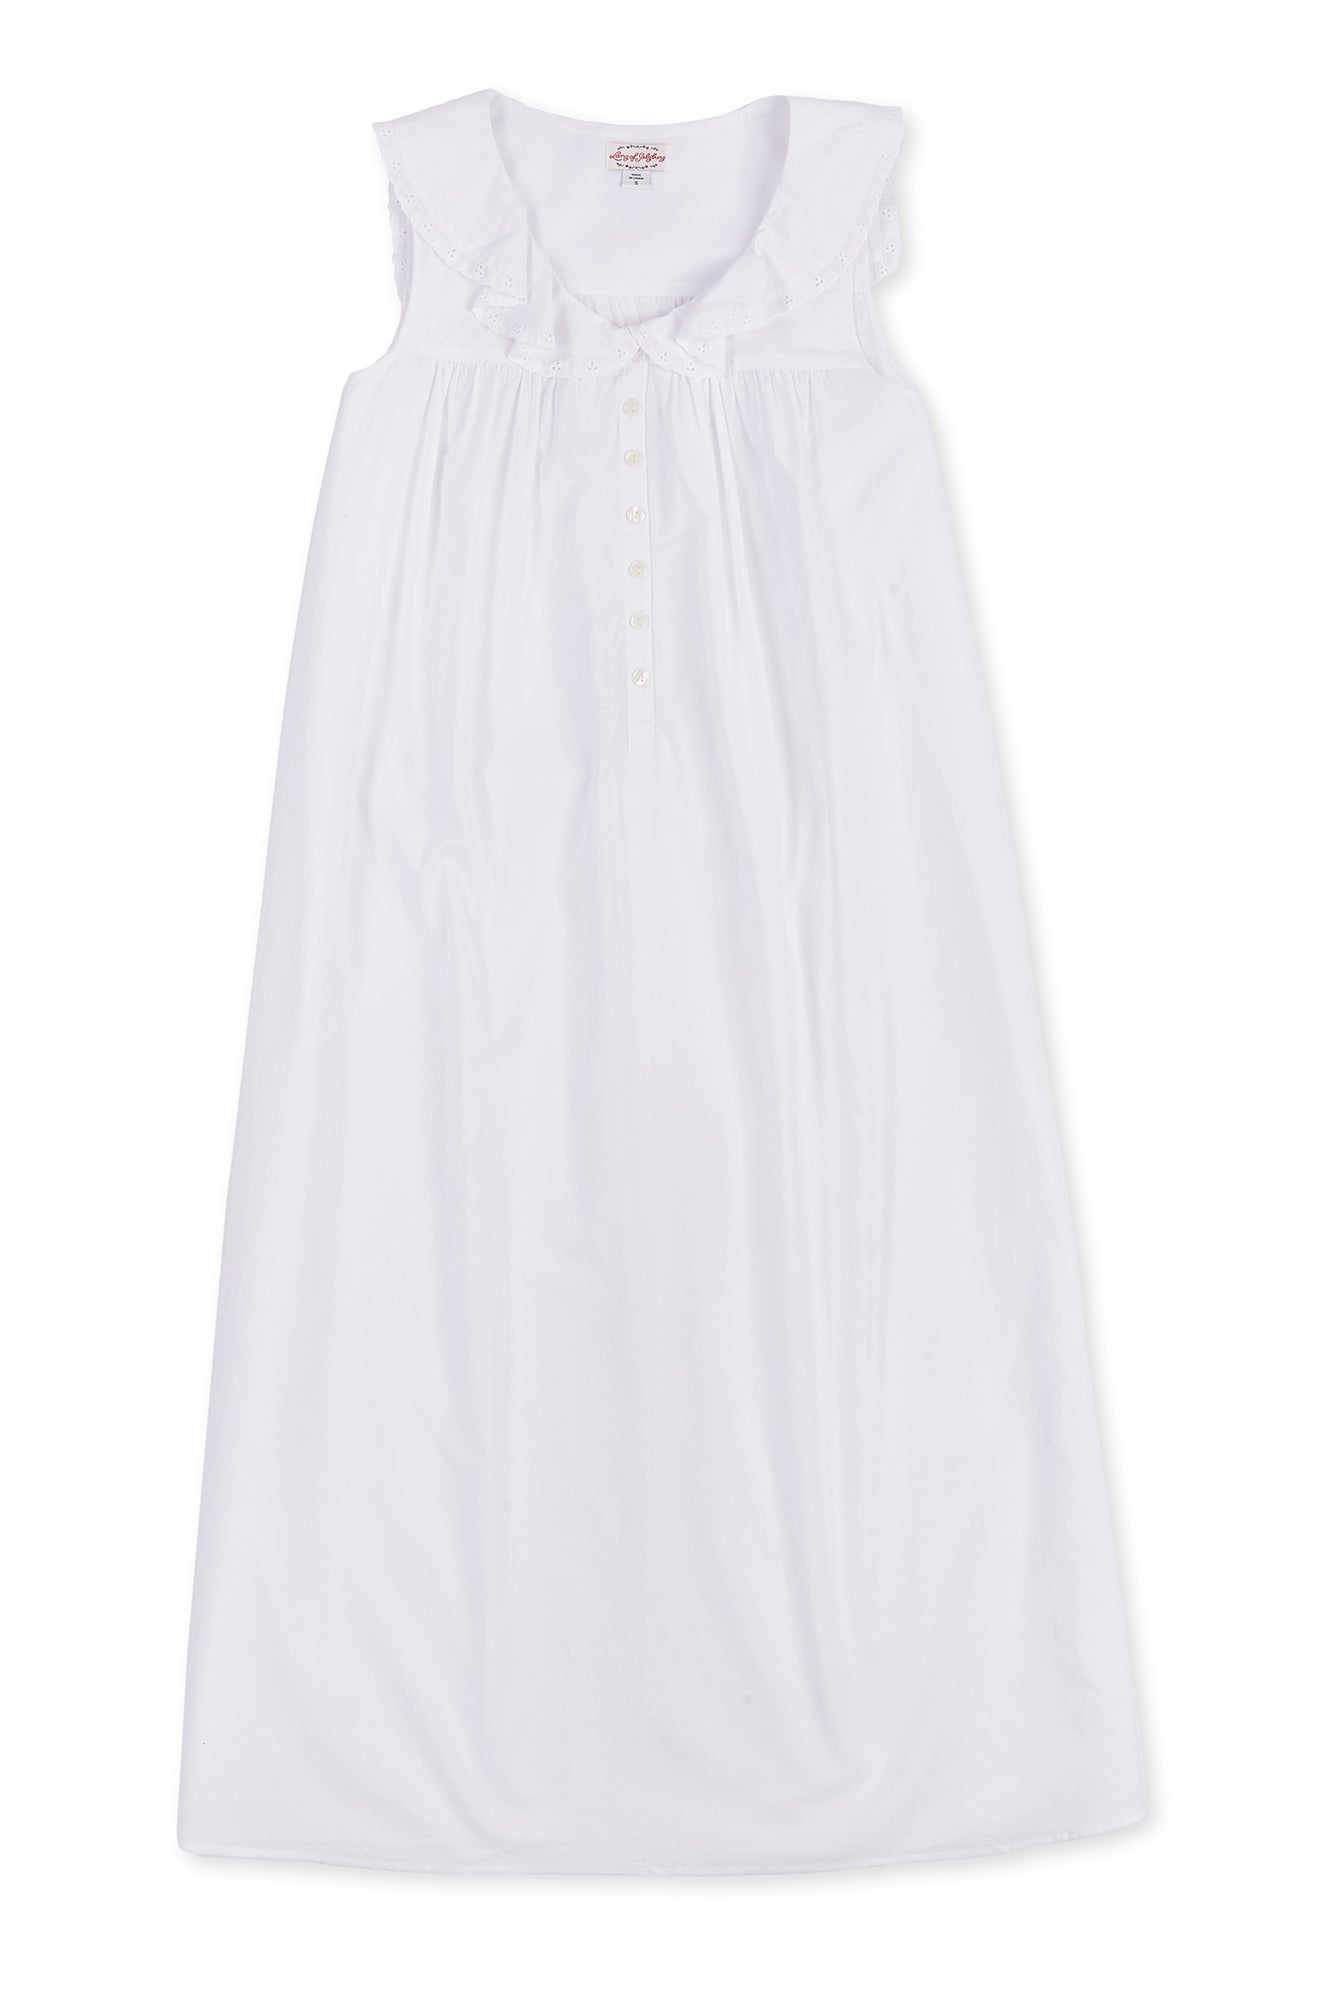 A white long nightgown